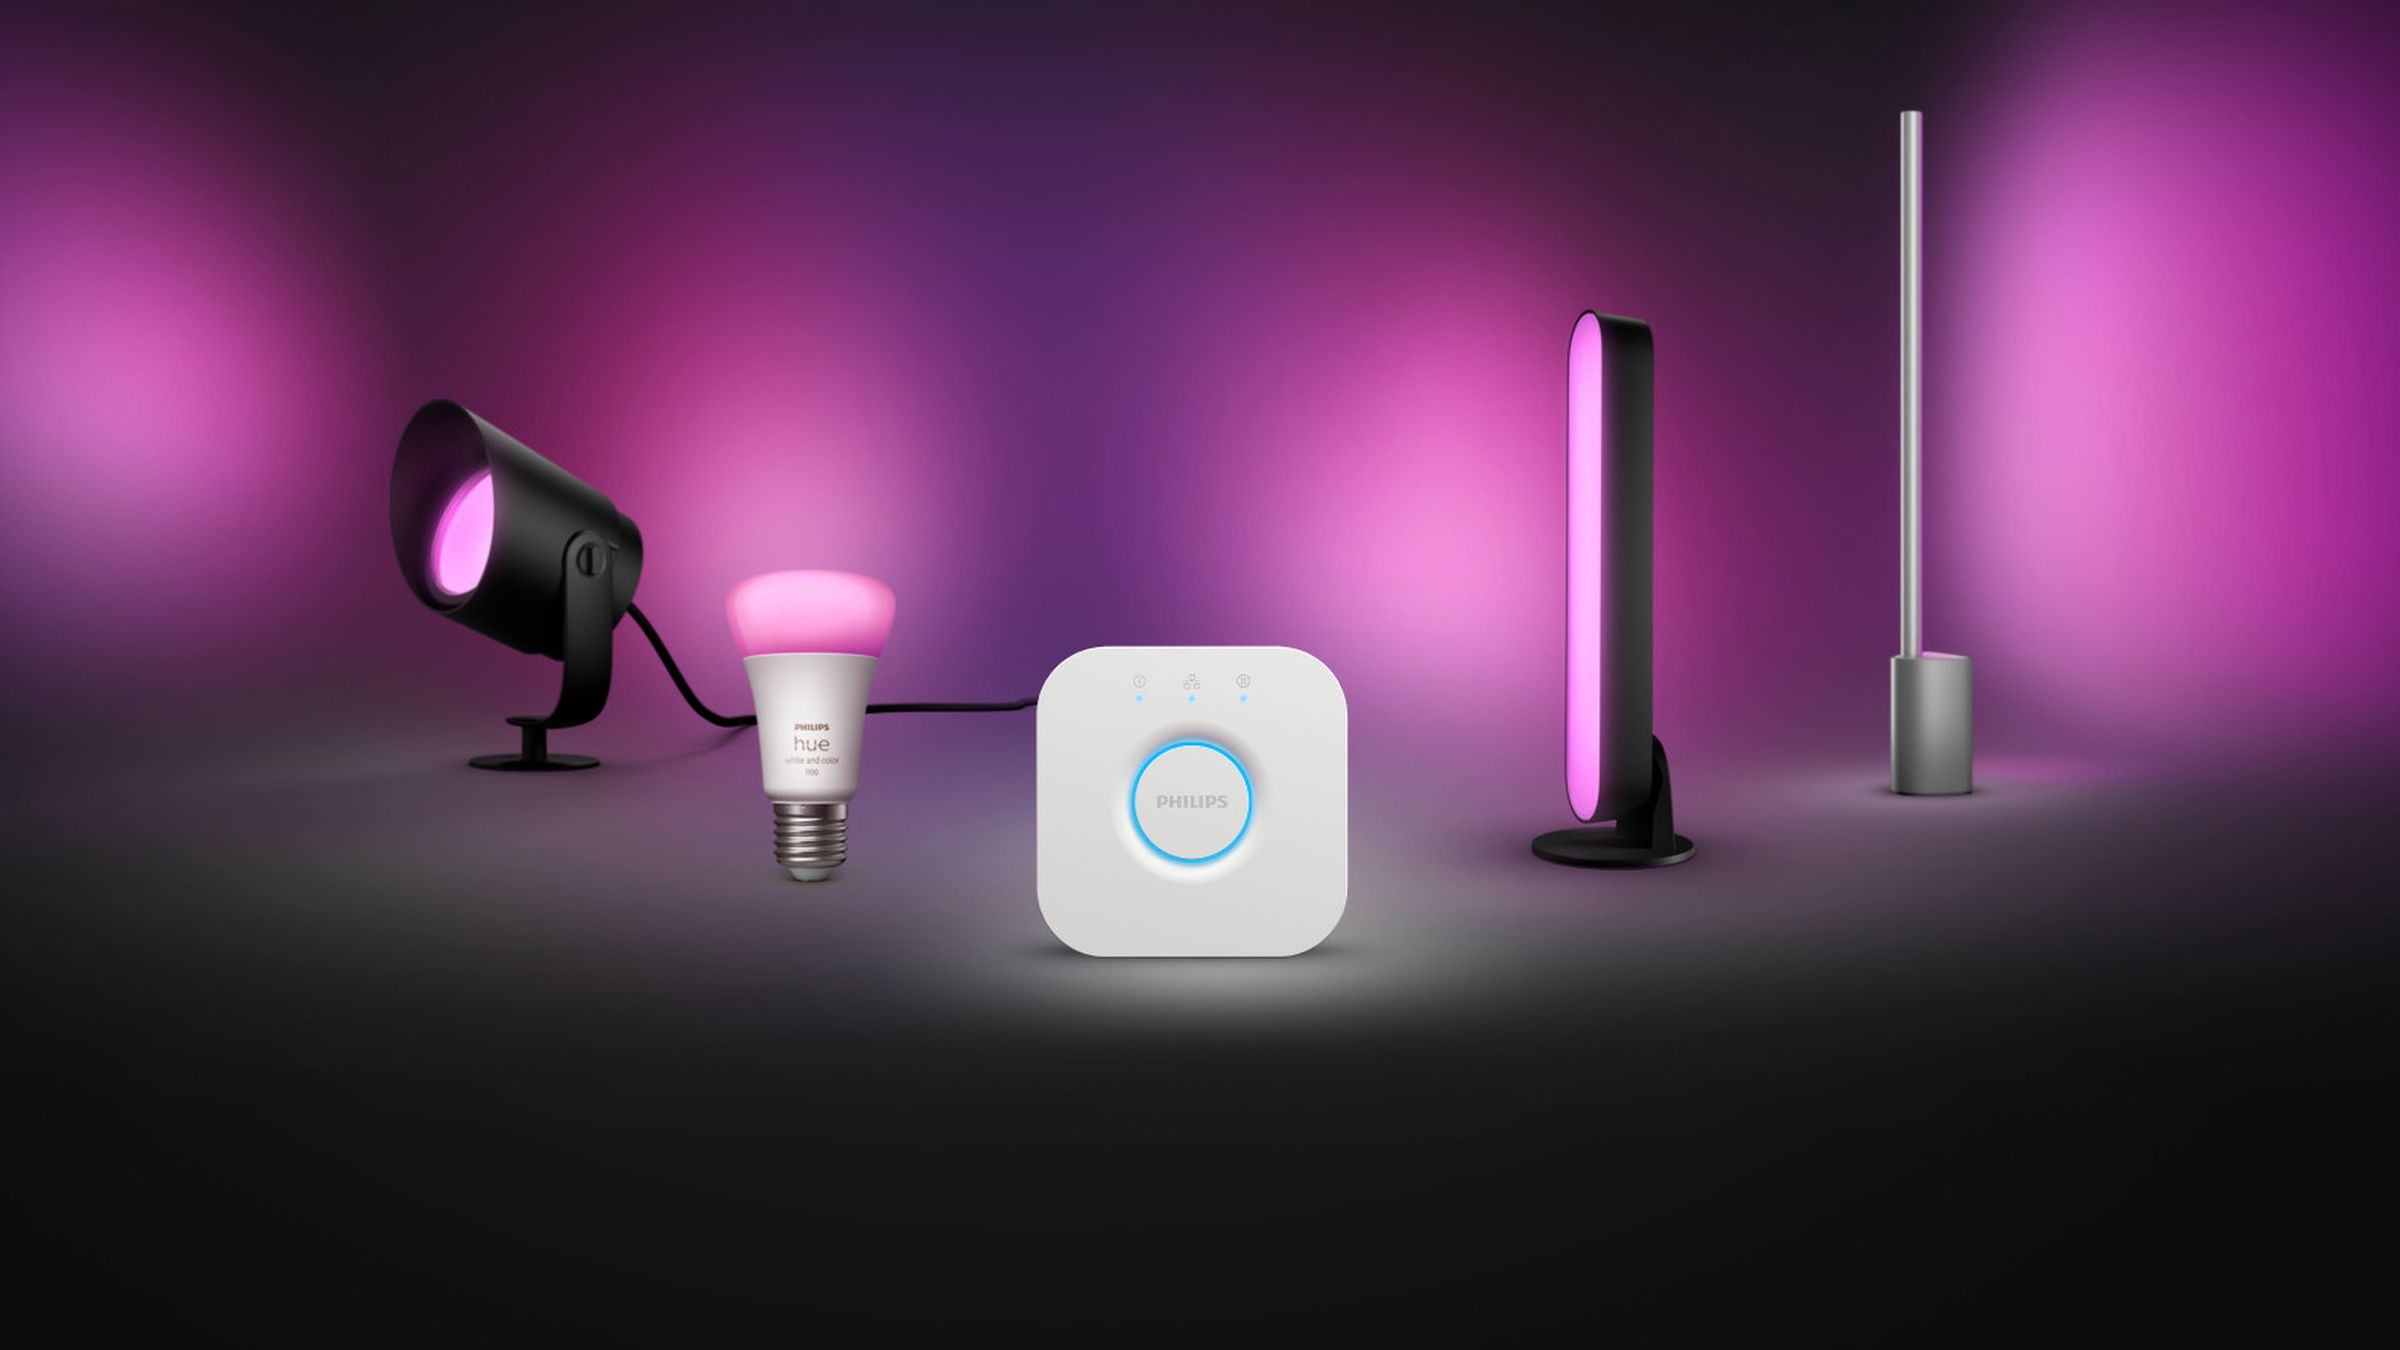 Amazon Echo models with built-in support for Zigbee don’t need a Philips Hue hub to control your Philips smart lighting.